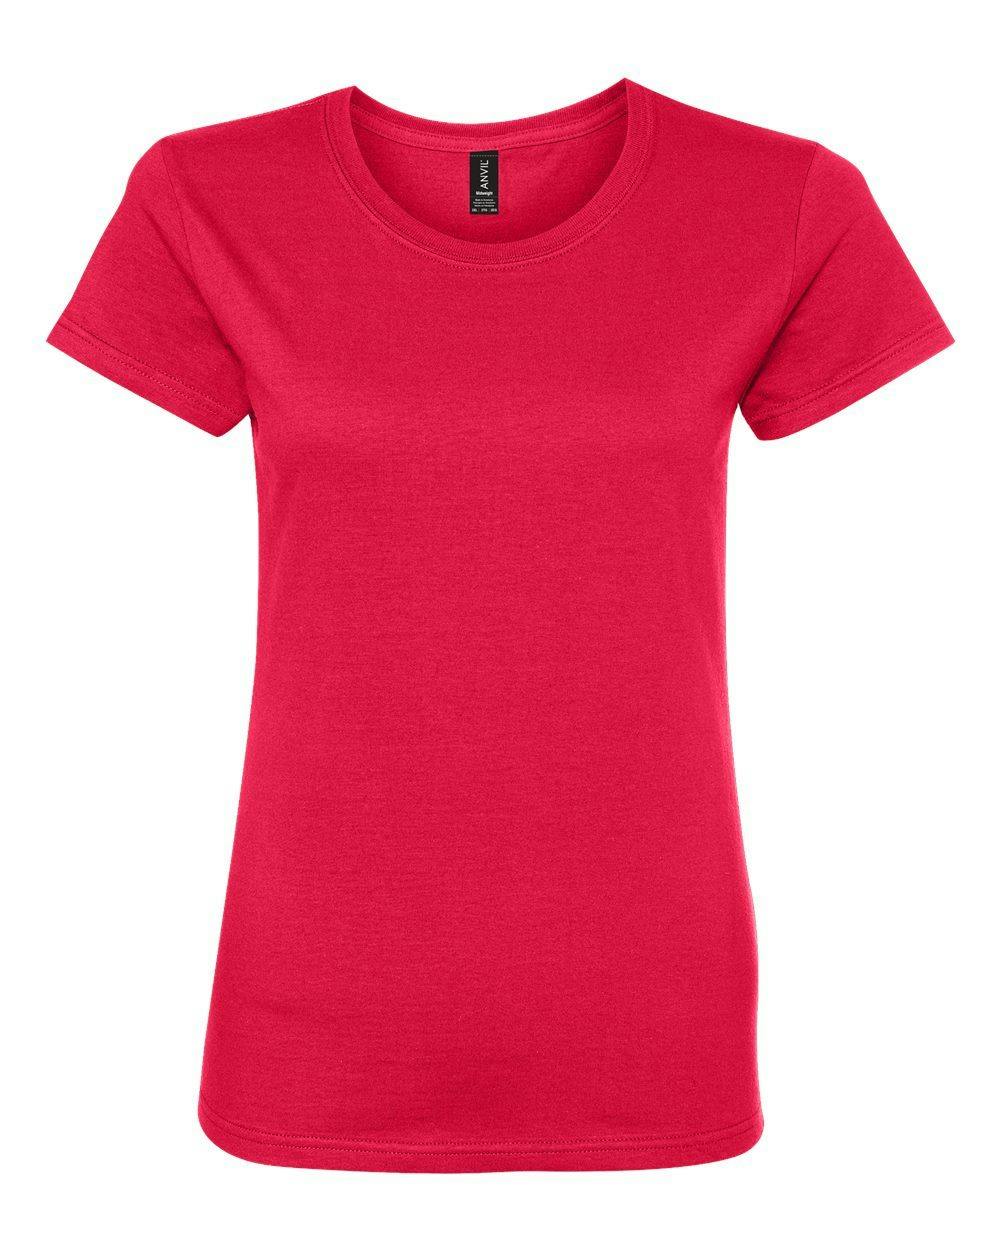 Image for Women’s Midweight T-Shirt - 780L